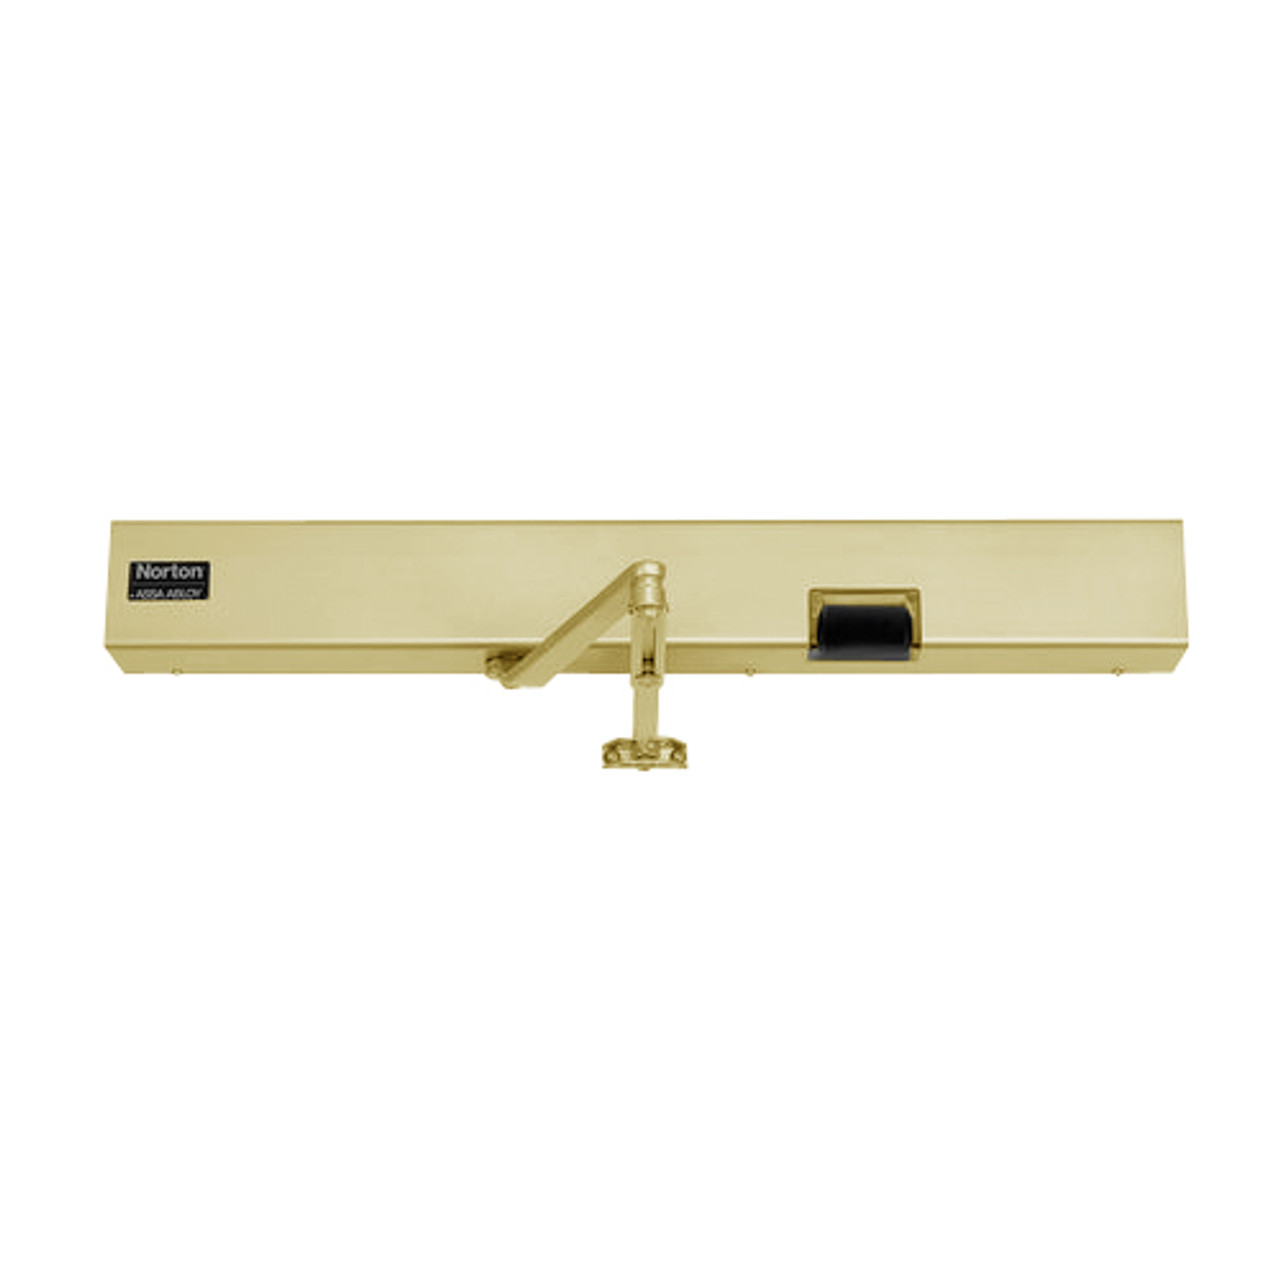 7125SZ-LH-24VDC-696 Norton 7100SZ Series Safe Zone Multi-Point Closer/Holder with Motion Sensor and Push Side Double Lever 11 inch Main Arm in Gold Finish